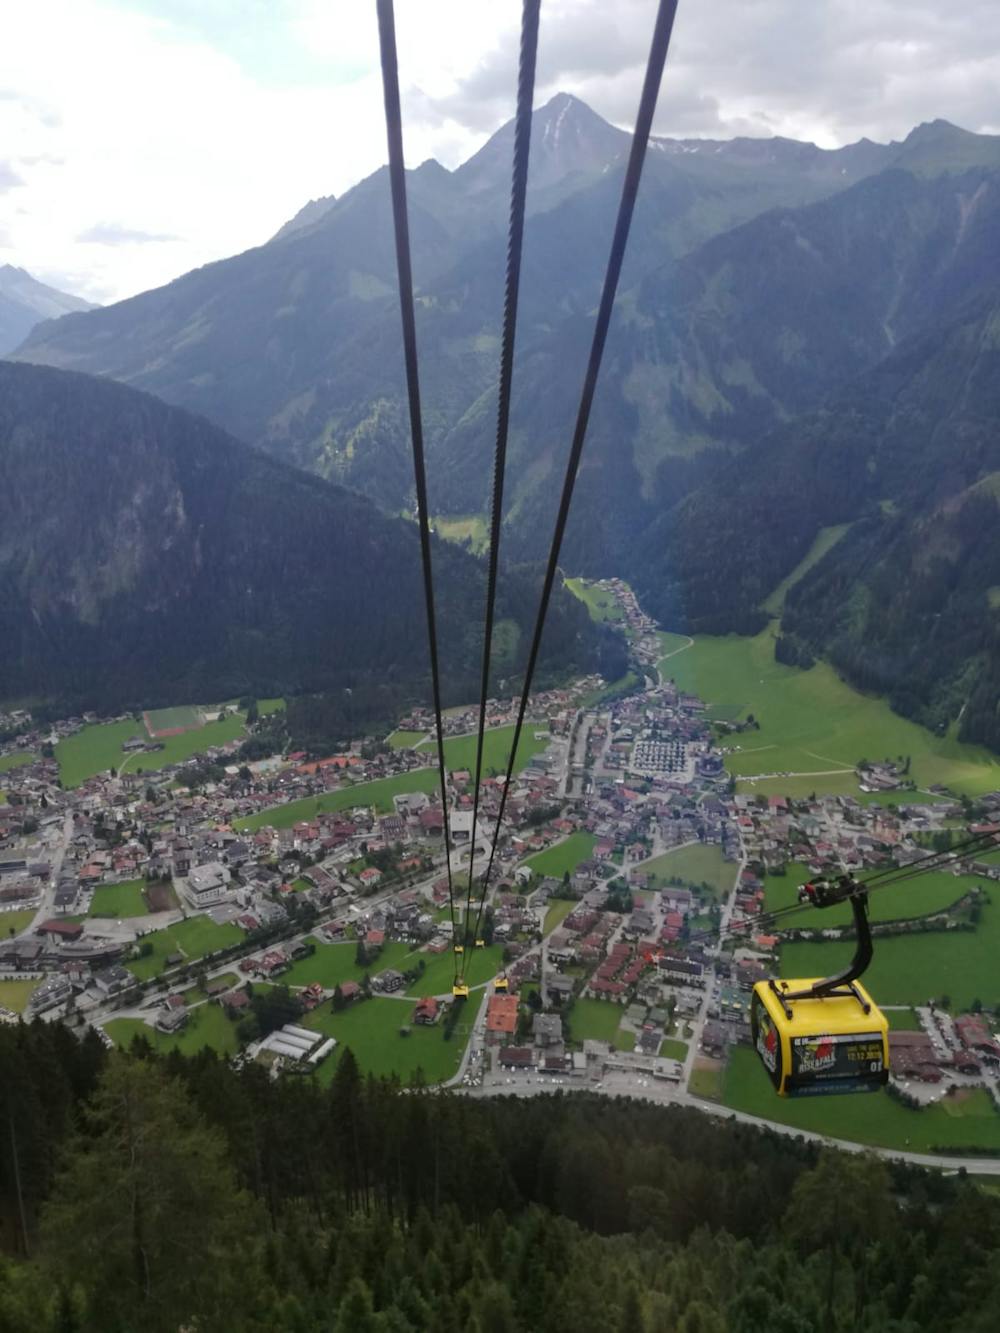 Looking down on Mayrhofen from the Penkenbahn.